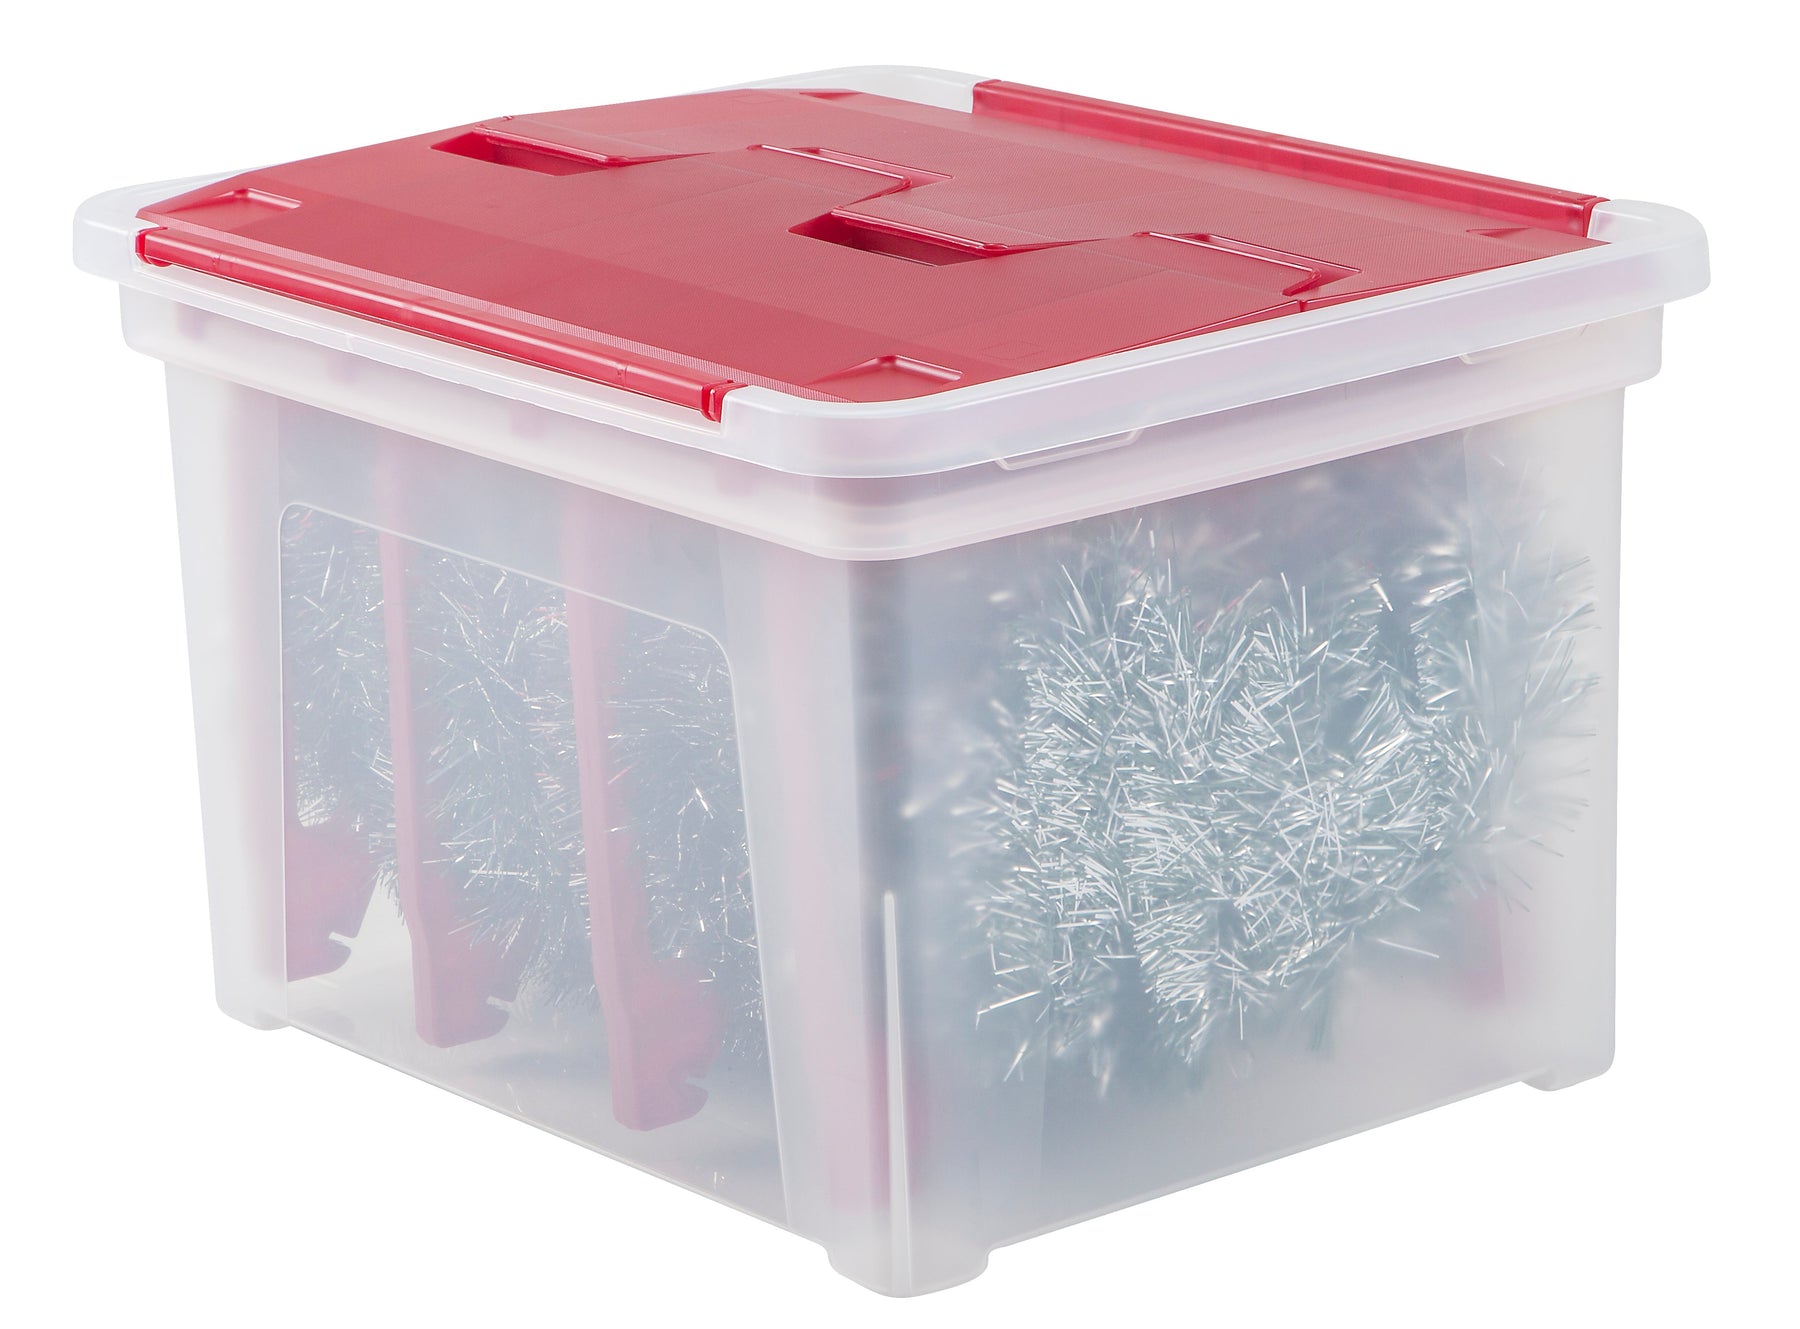 IRIS USA Ornament Storage Box, Plastic Organization Container Bin,  Clear/Red - Fits Into Any Room in The House Christmas Storage Sales